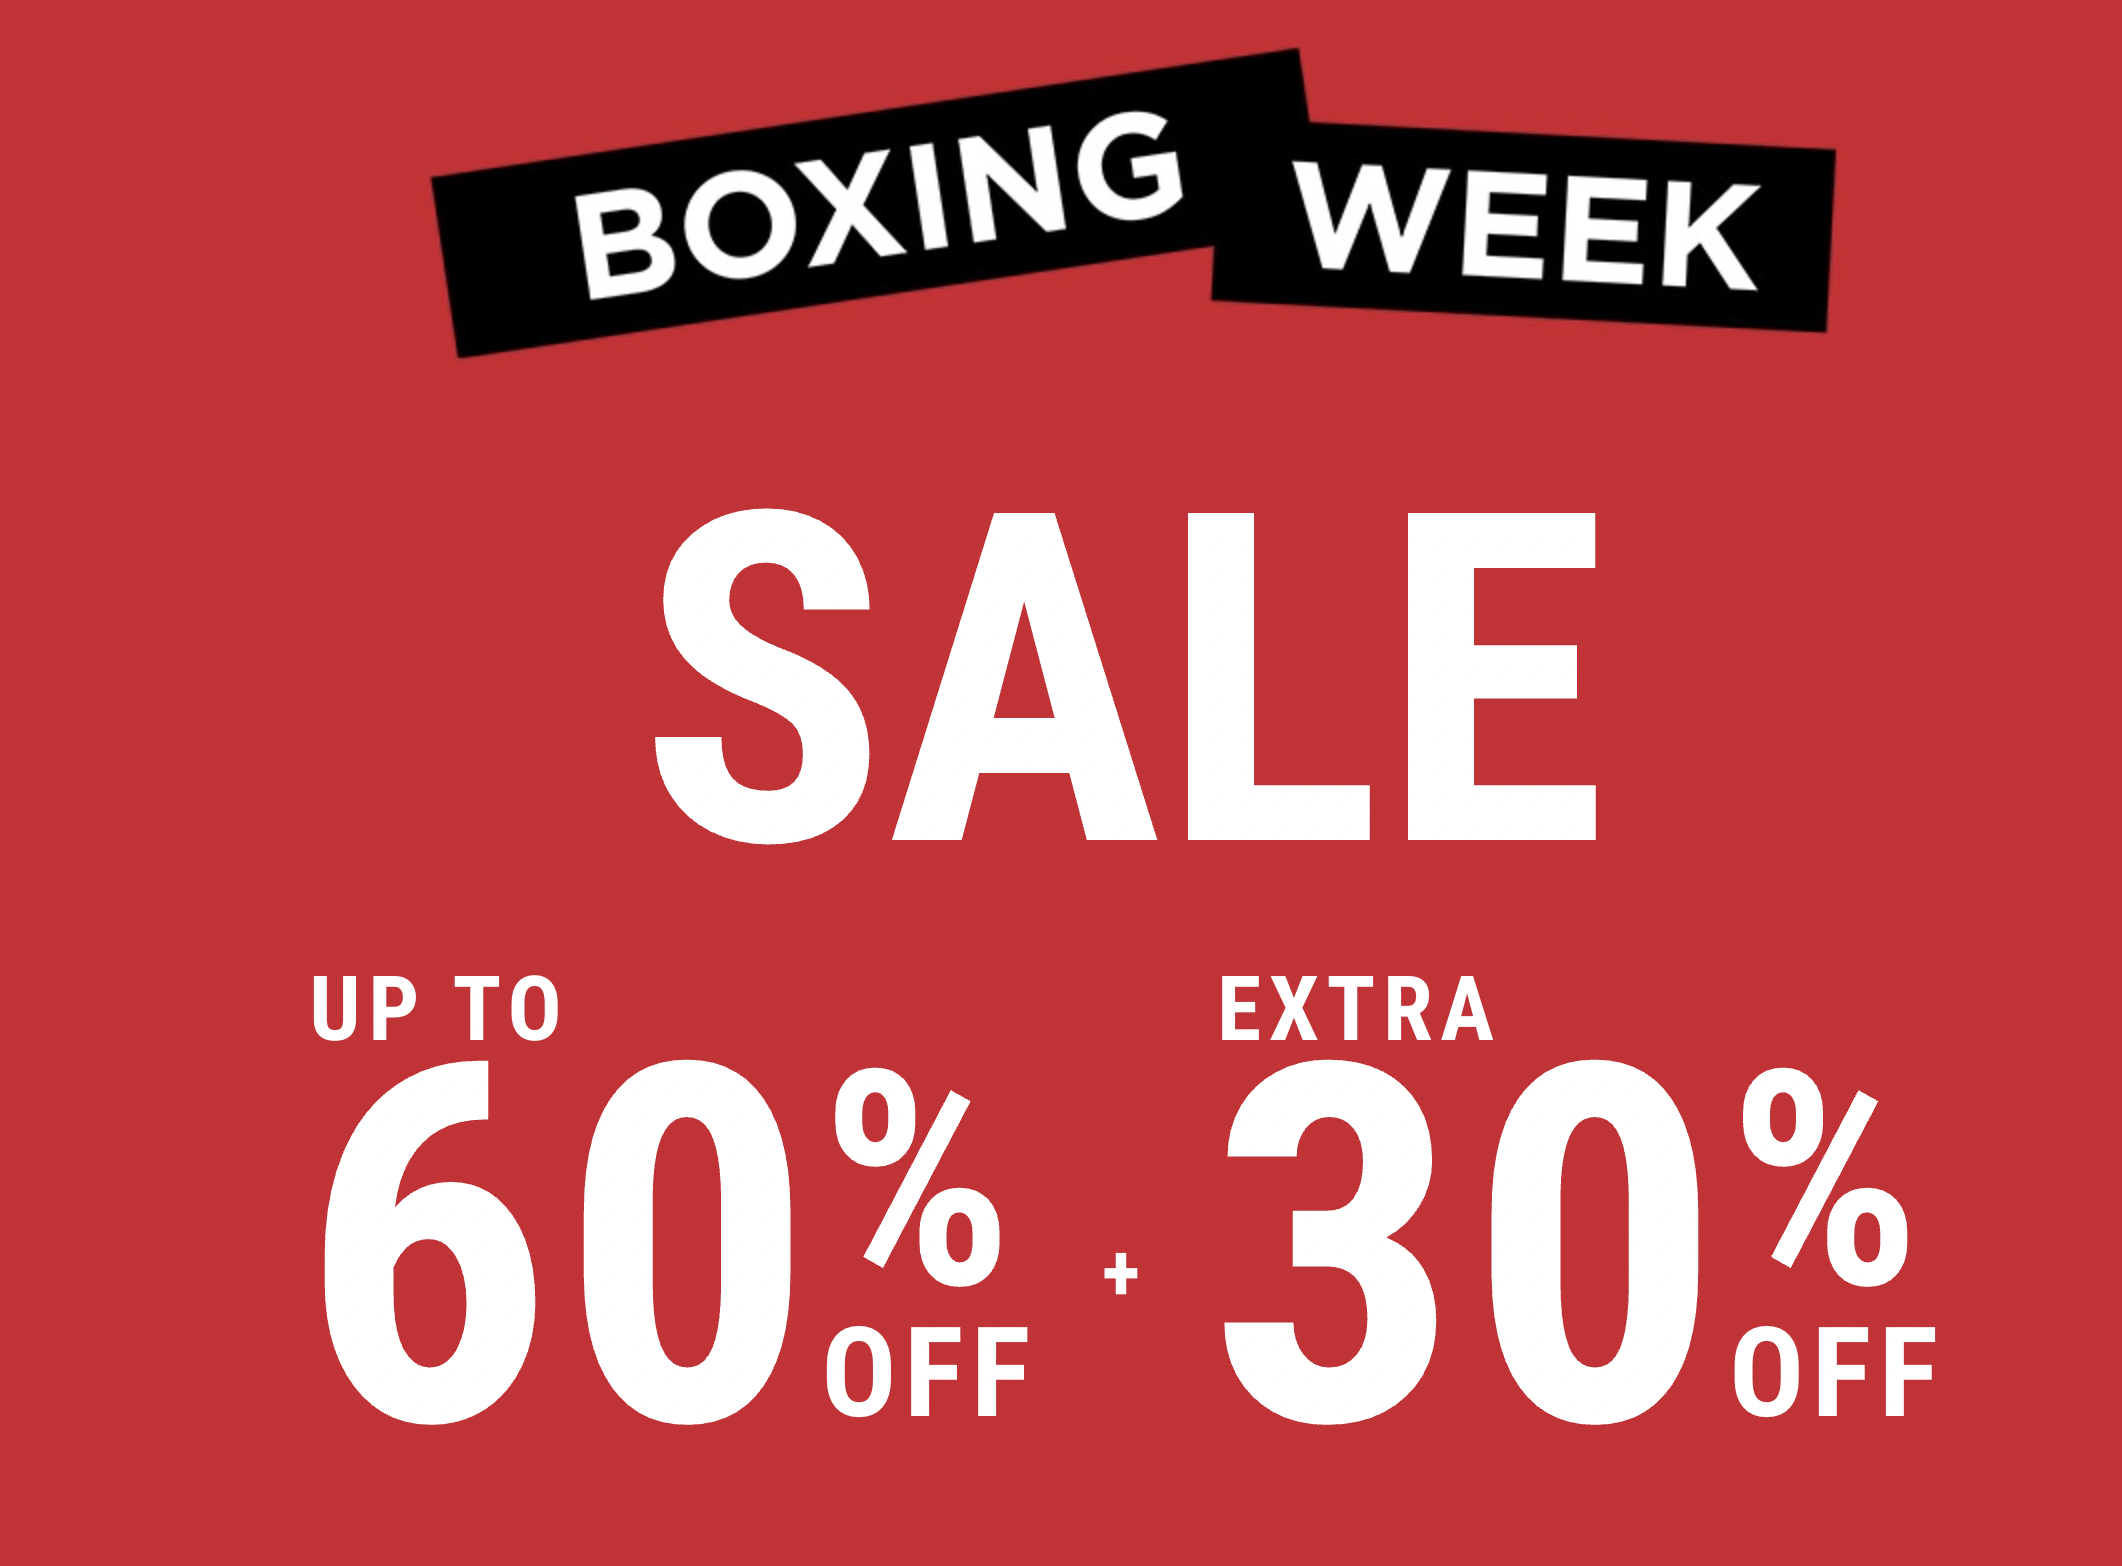 RW&CO. Canada Boxing Week Sale Save Up to 60 OFF + Extra 30 OFF